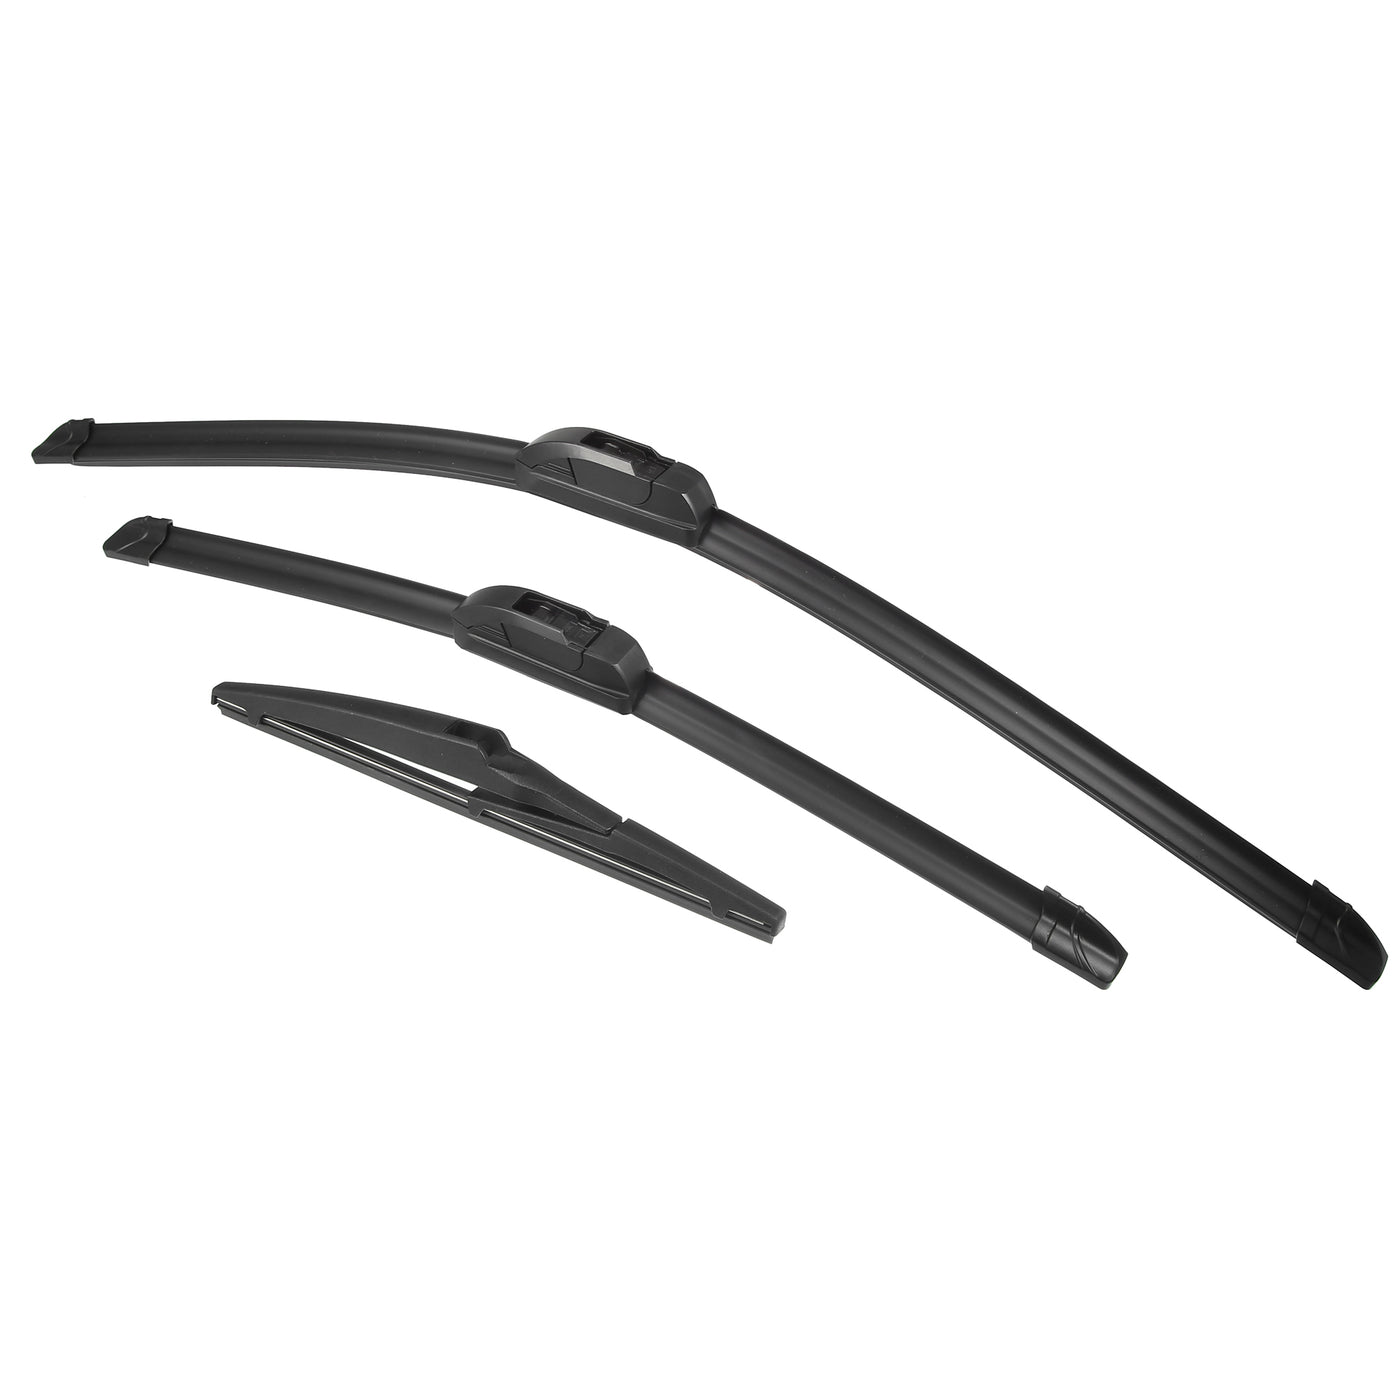 ACROPIX Front Rear Windshield Wiper Blade Set Car Wiper Blade Fit for Toyota Prius V 2012-2018 - Pack of 3 Black